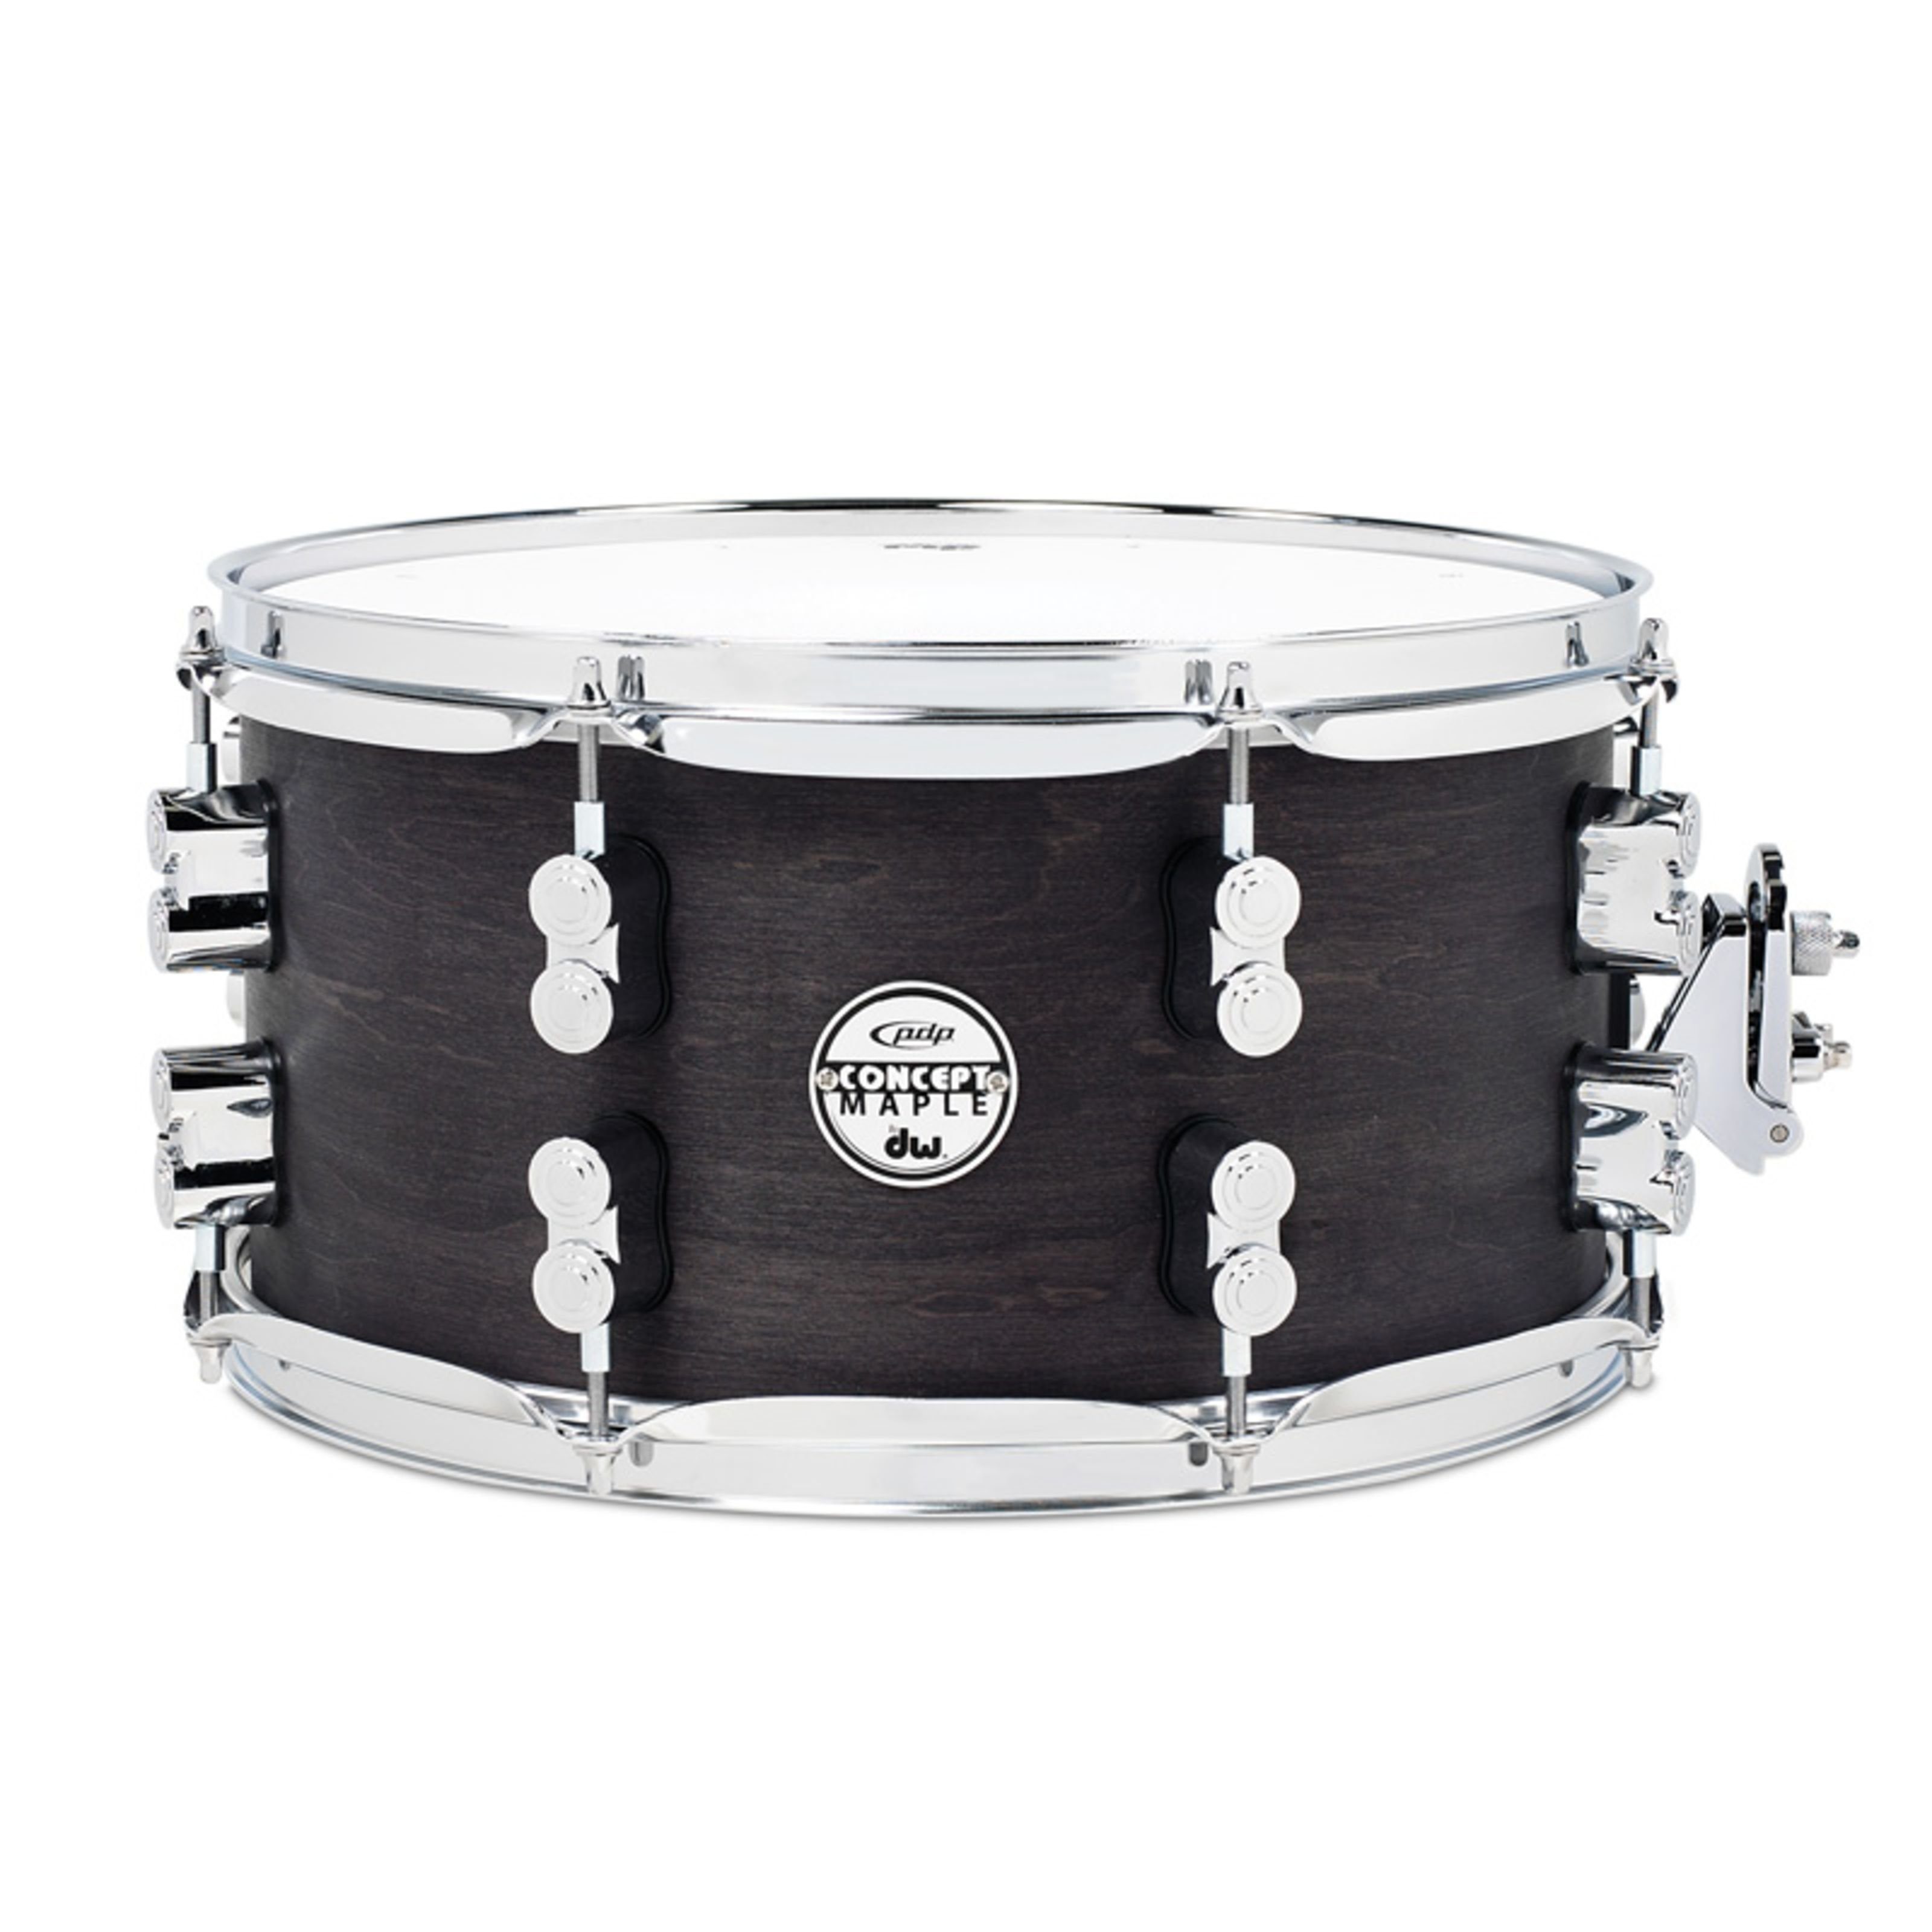 pdp Snare Drum,Black Wax Snare 13"x7", Schlagzeuge, Snare Drums, Black Wax Snare 13"x7" - Snare Drum